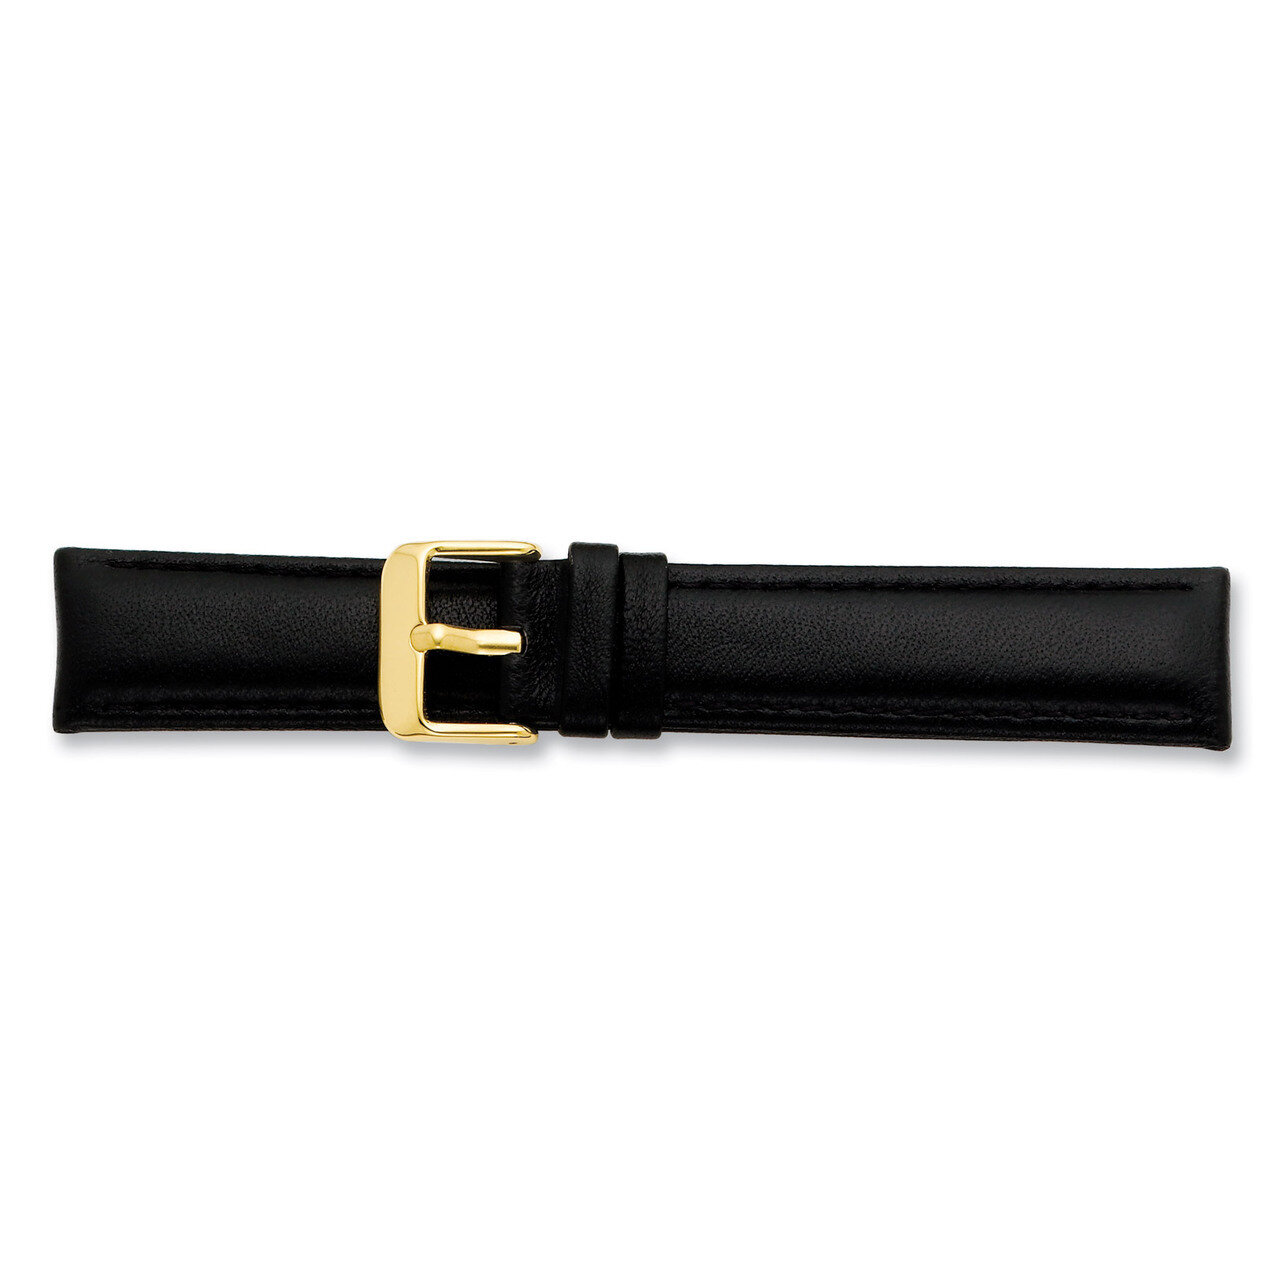 16mm Black Glove Leather Buckle Watch Band 7.75 Inch Gold-tone BA195-16